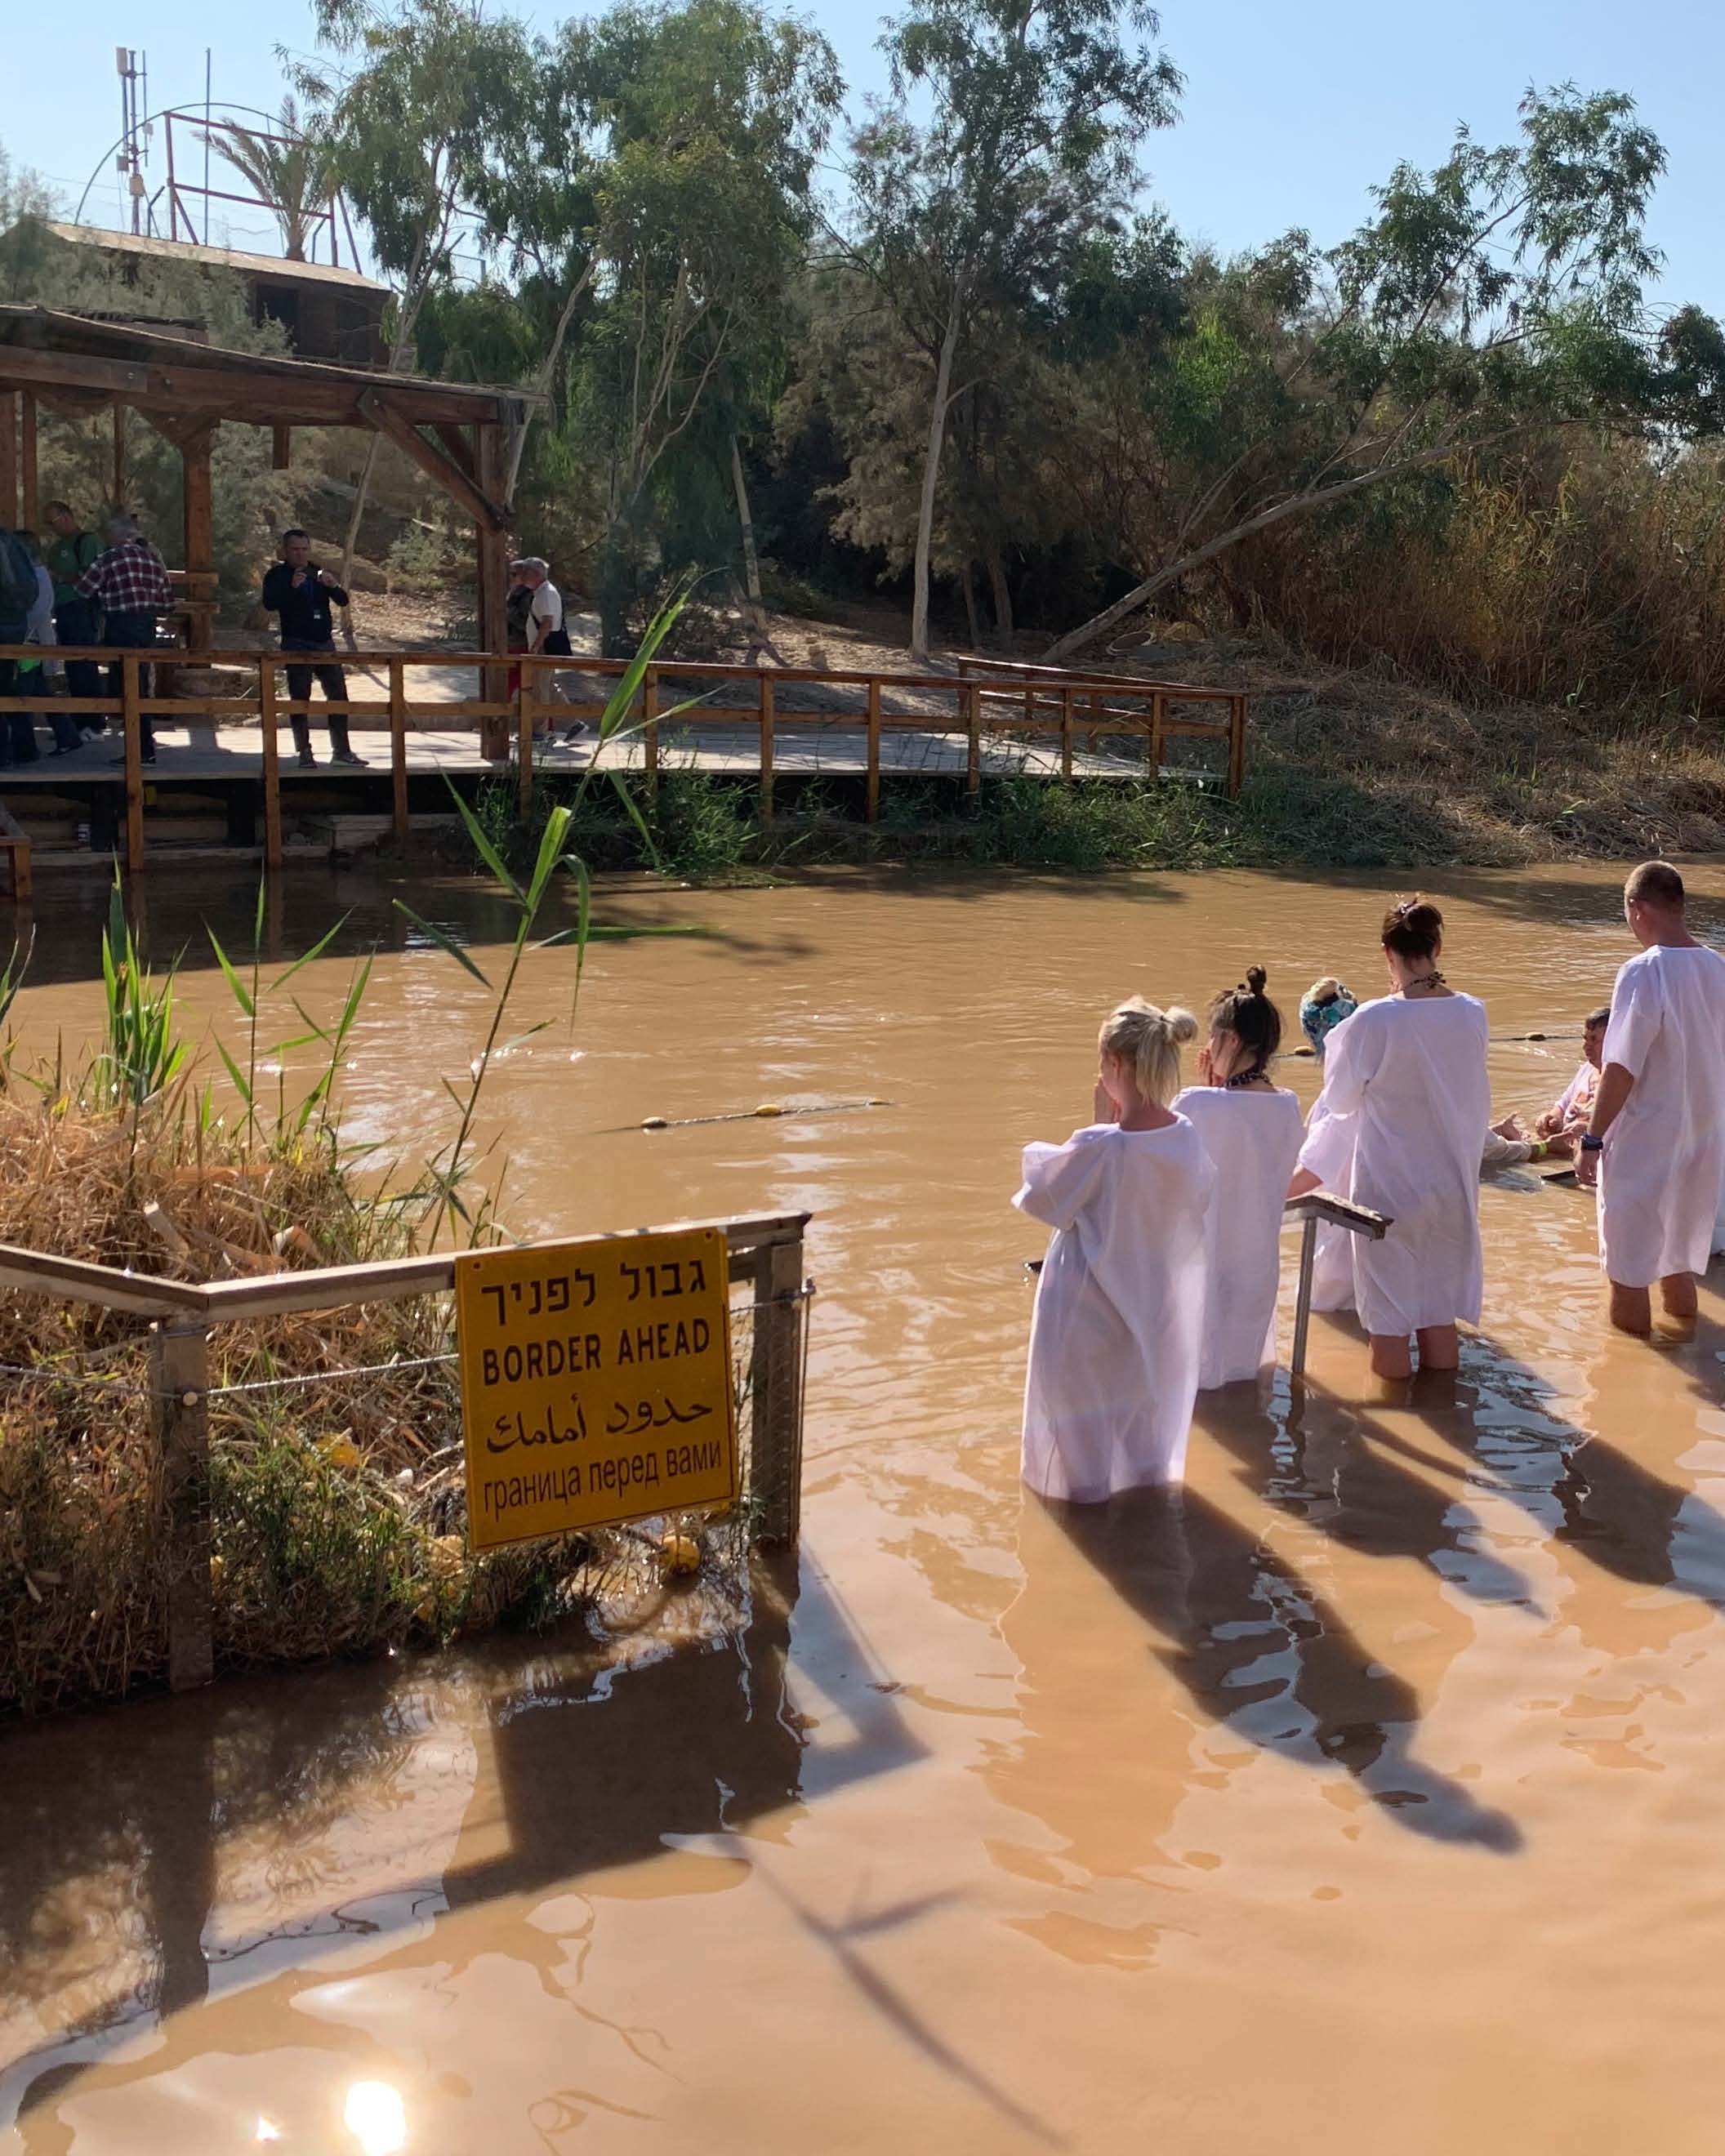 Christians taking baptism in the Jordan River (Source: Aaron Wolf, 2019).